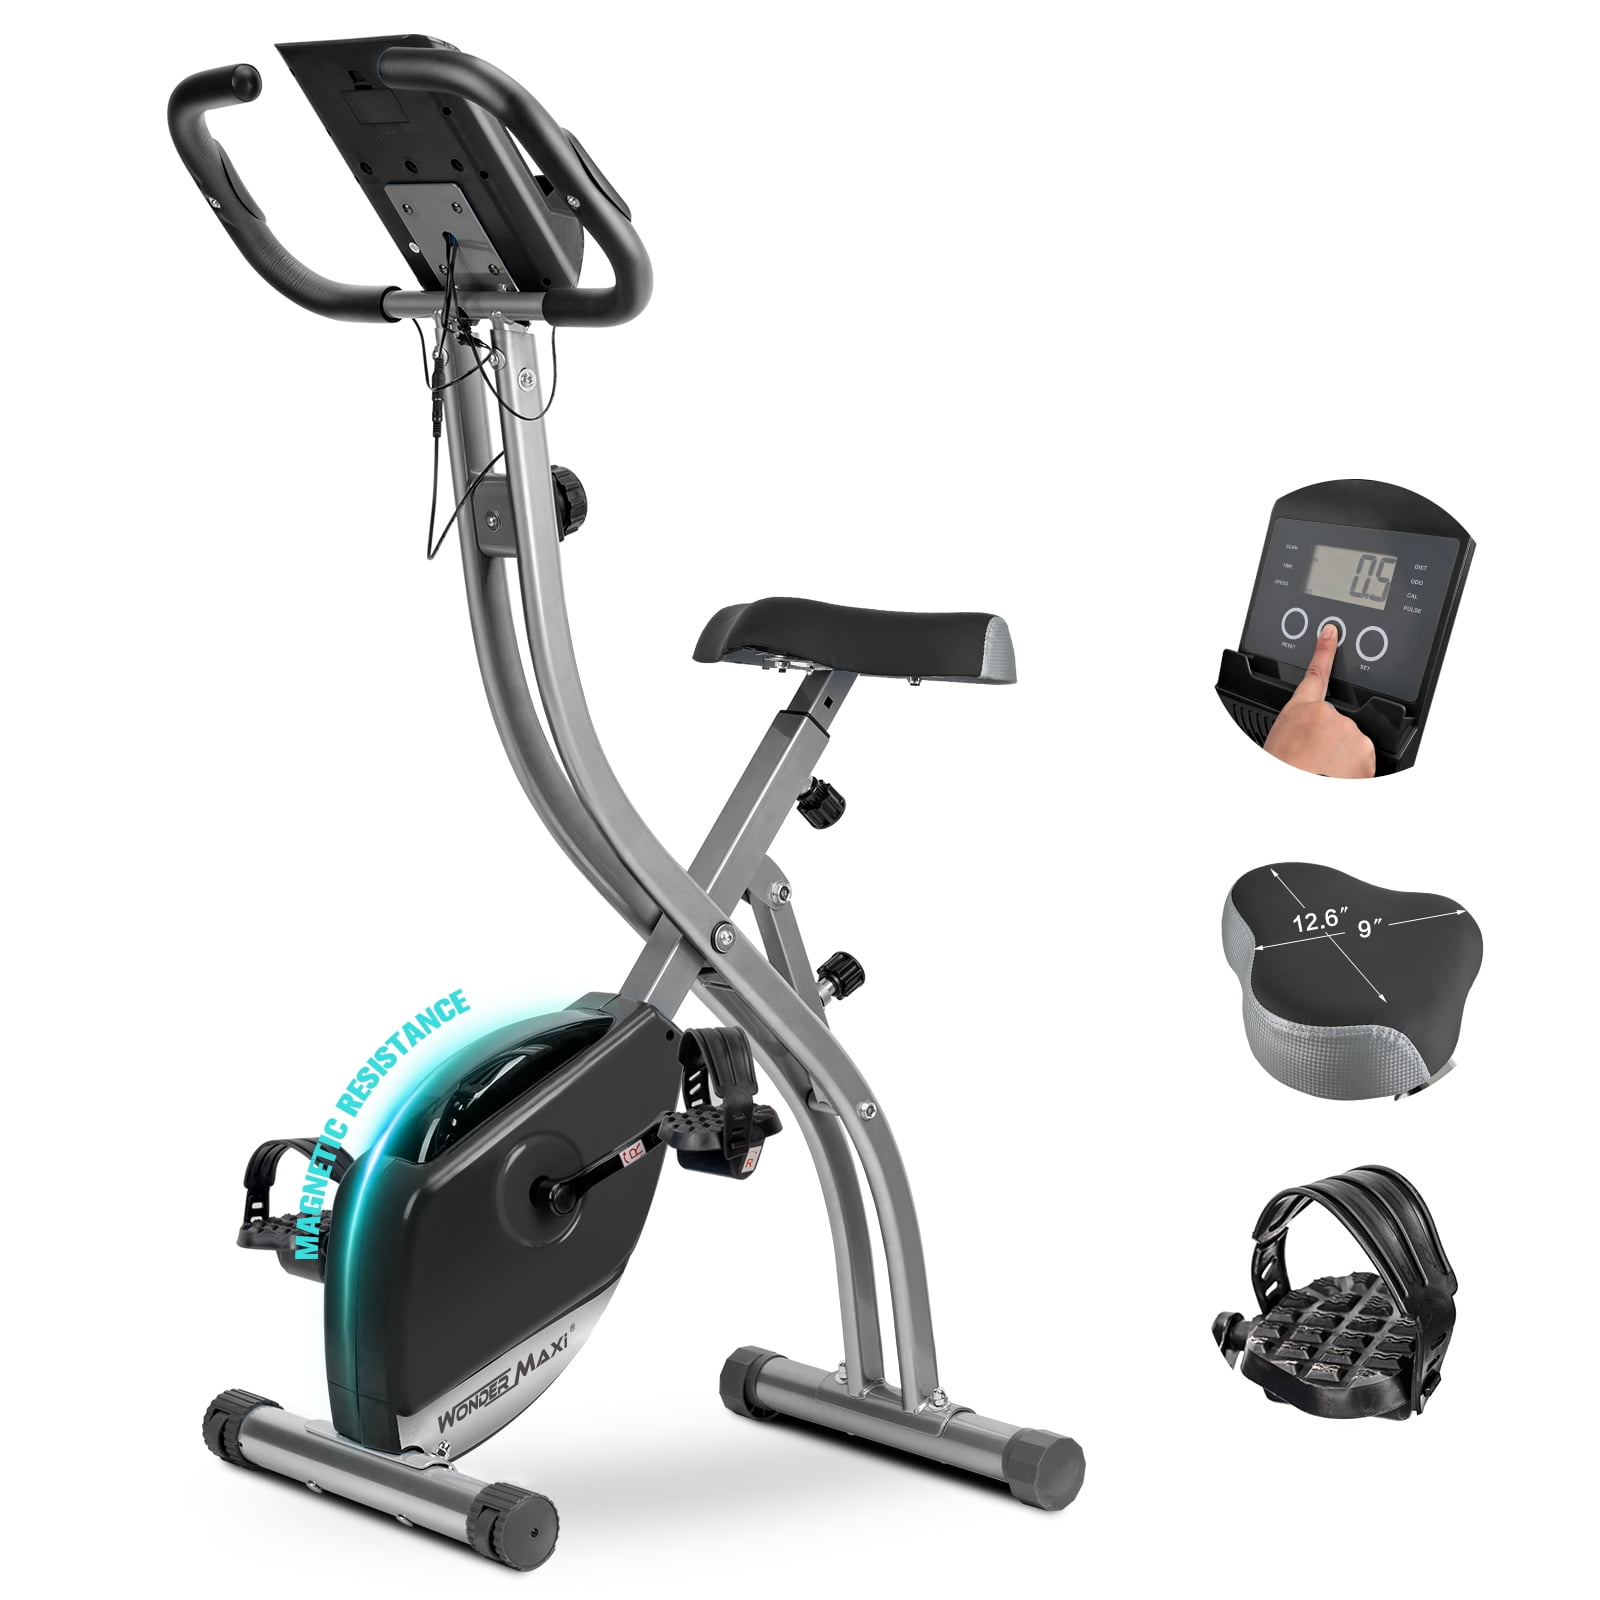 Details about   Bicycle Cycling Exercise Stationary Bike Cardio Workout Bike Home Indoor Trainer 